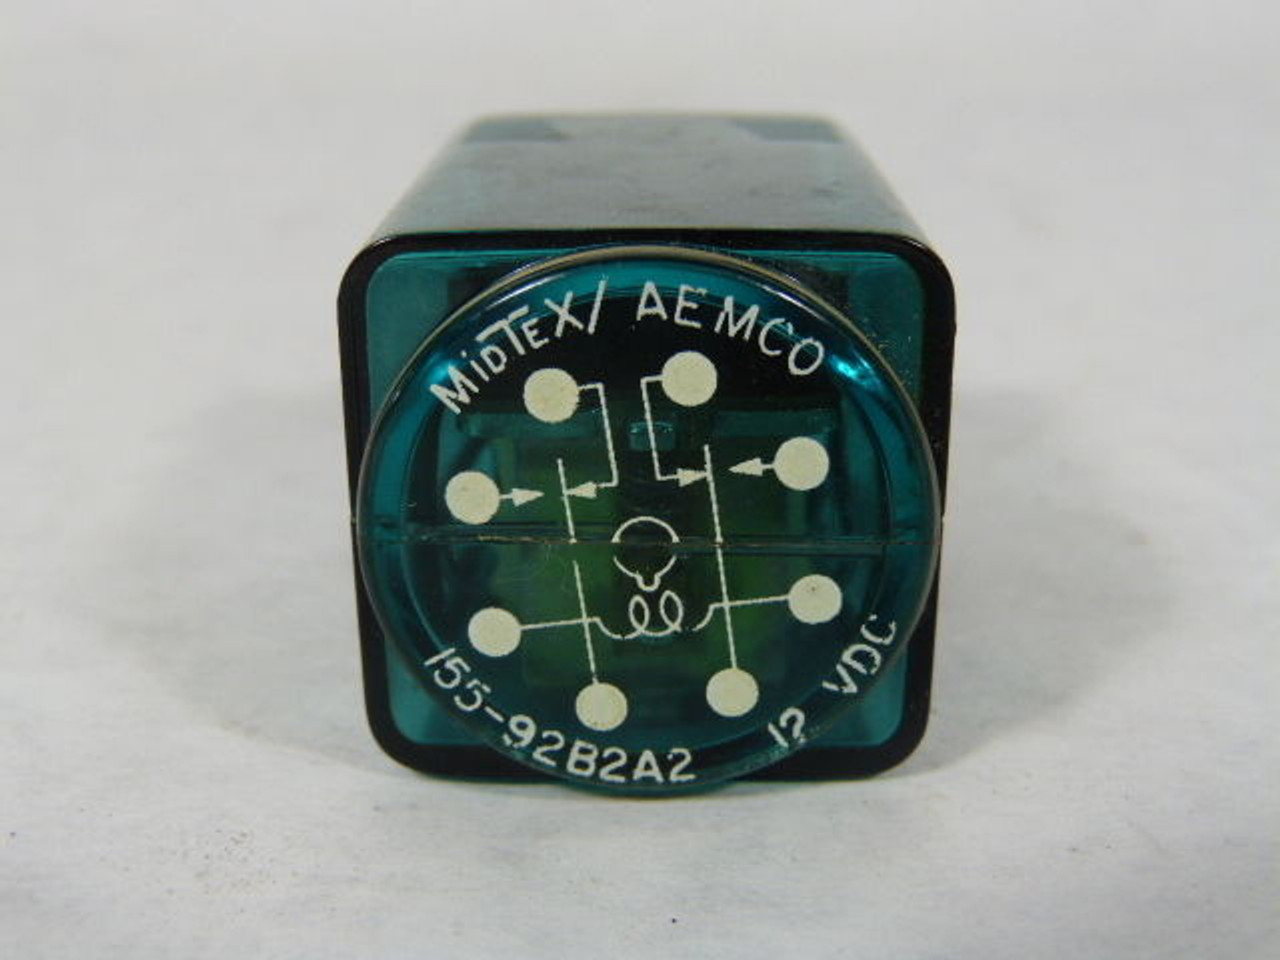 Midtex Aemco 155-92B2A2 Time Delay Relay USED